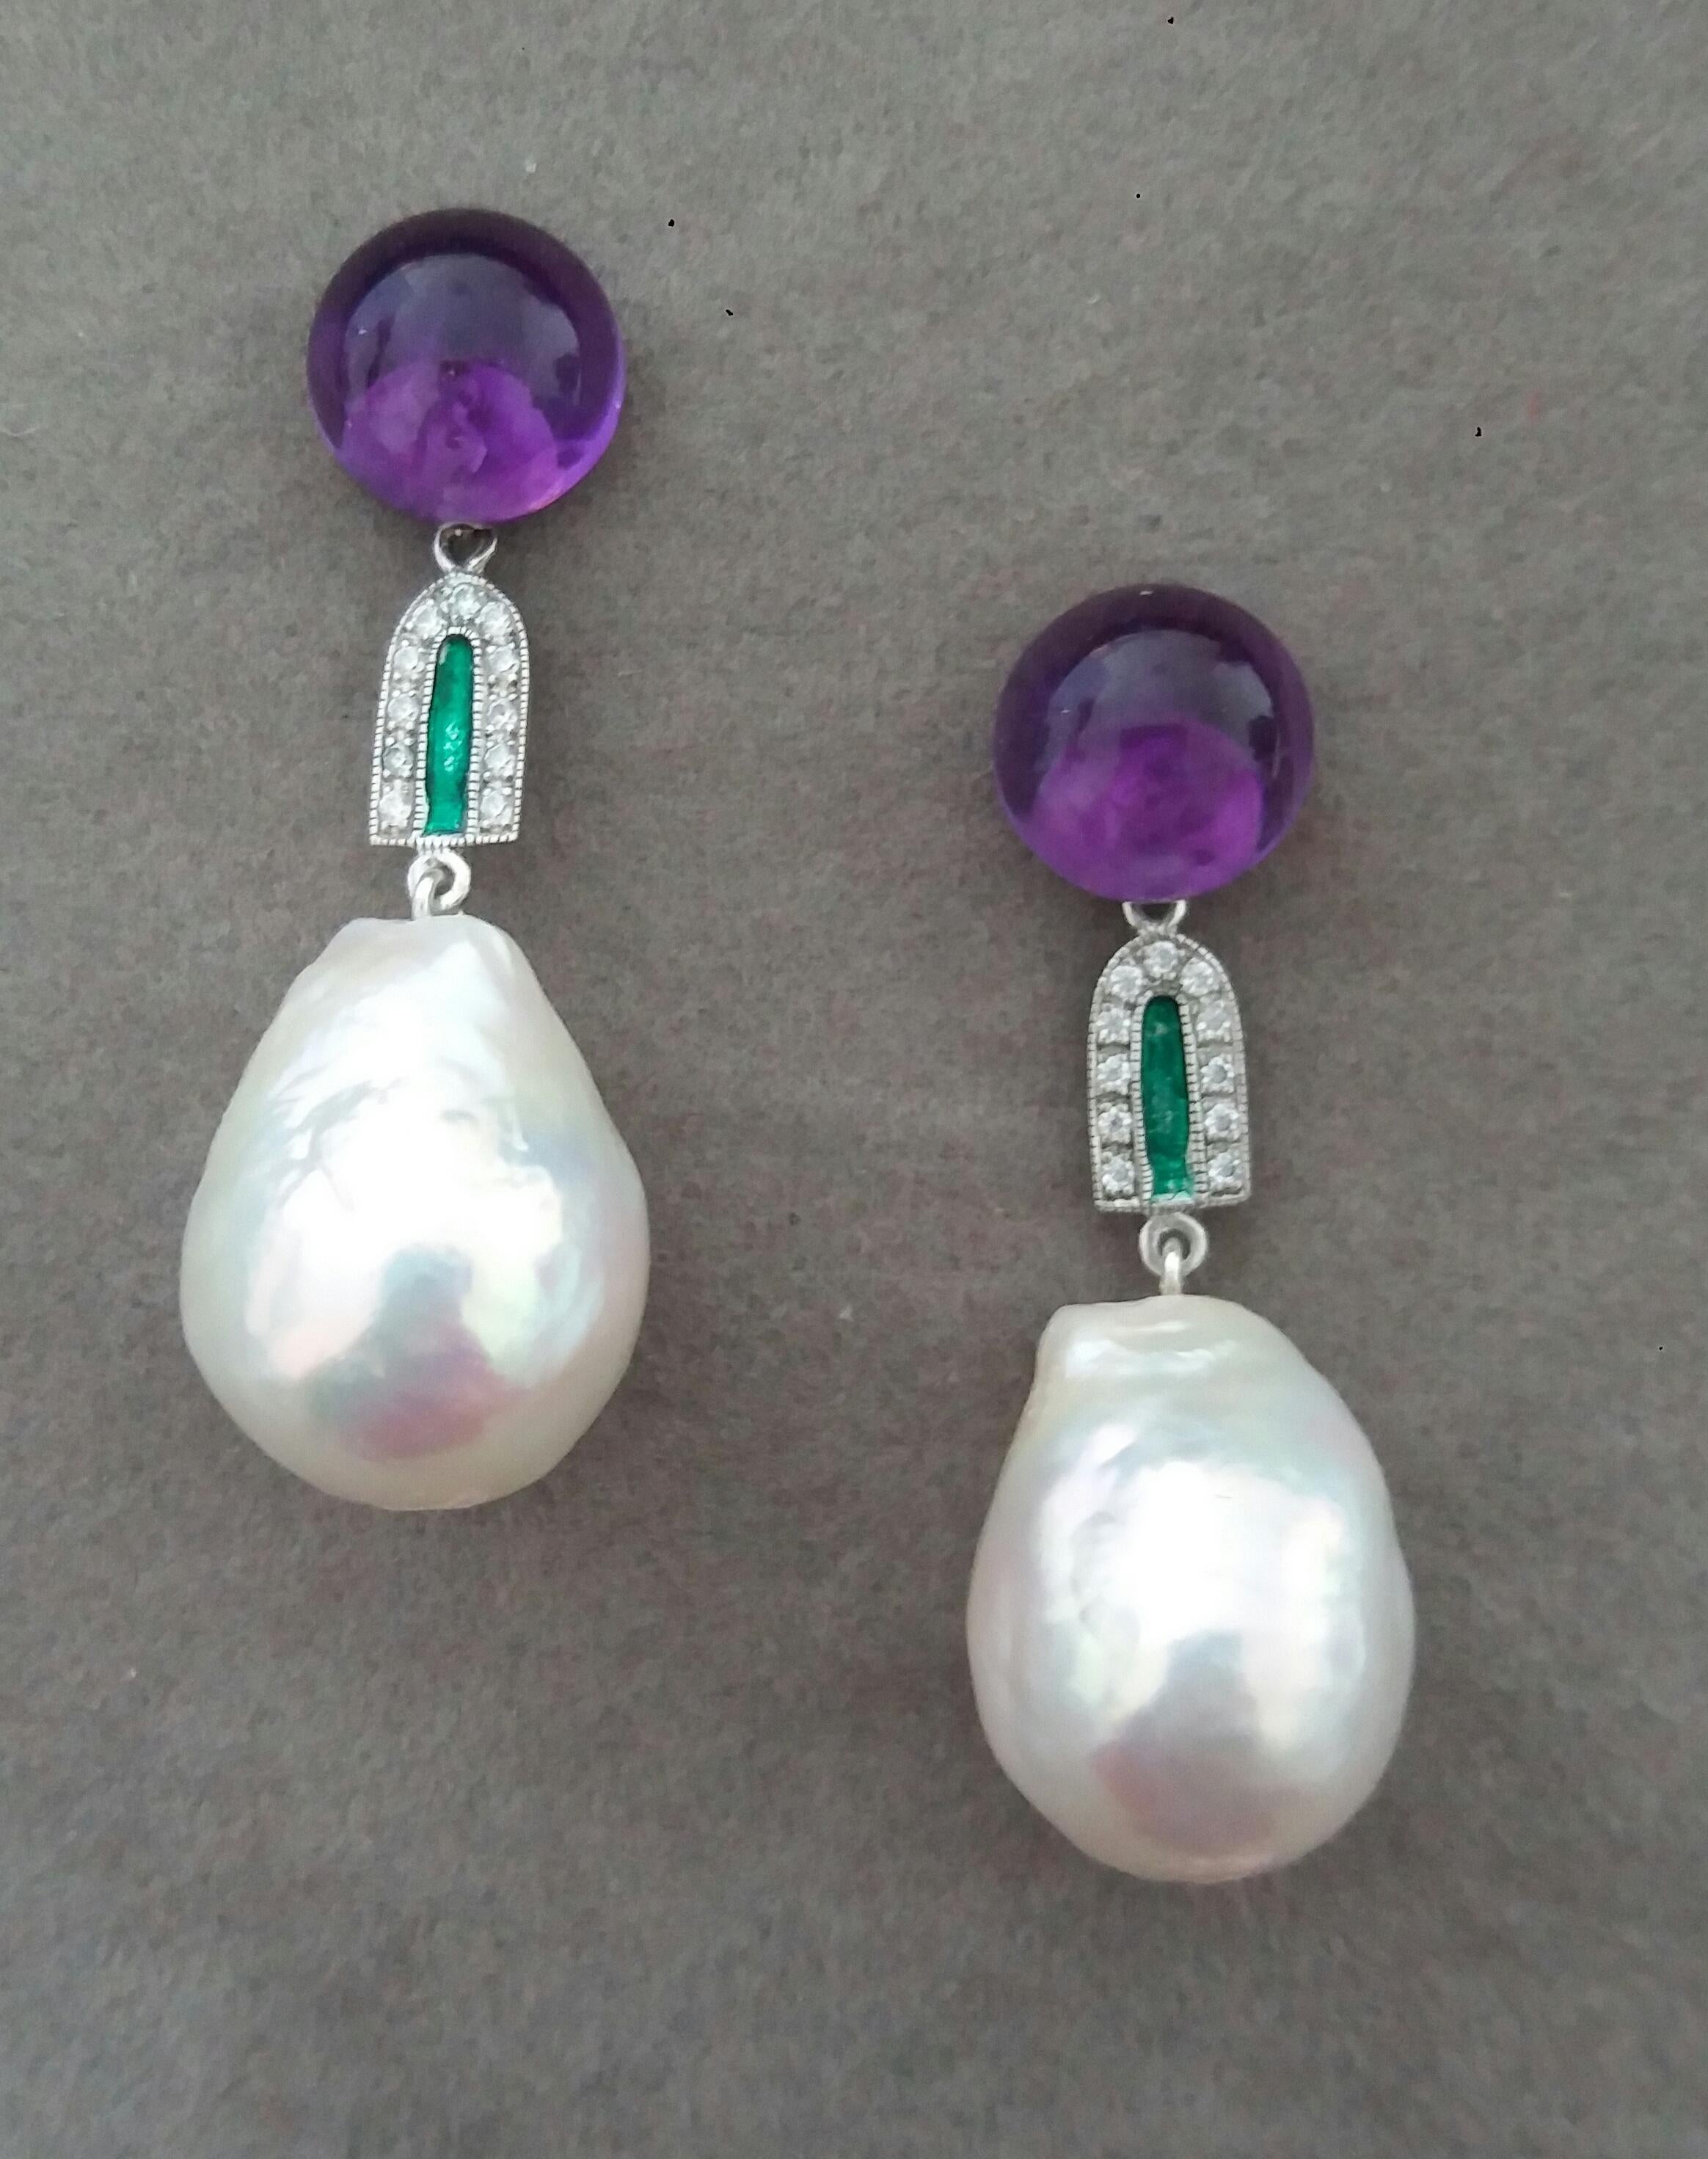 These unique earrings have 2 Amethyst round buttons of 10 mm in diameter on top,  supporting  2 elements in white gold 22 full cut diamonds and green enamel, to which finally are suspended  2 very good luster white Baroque Pearls measuring 14 x 18